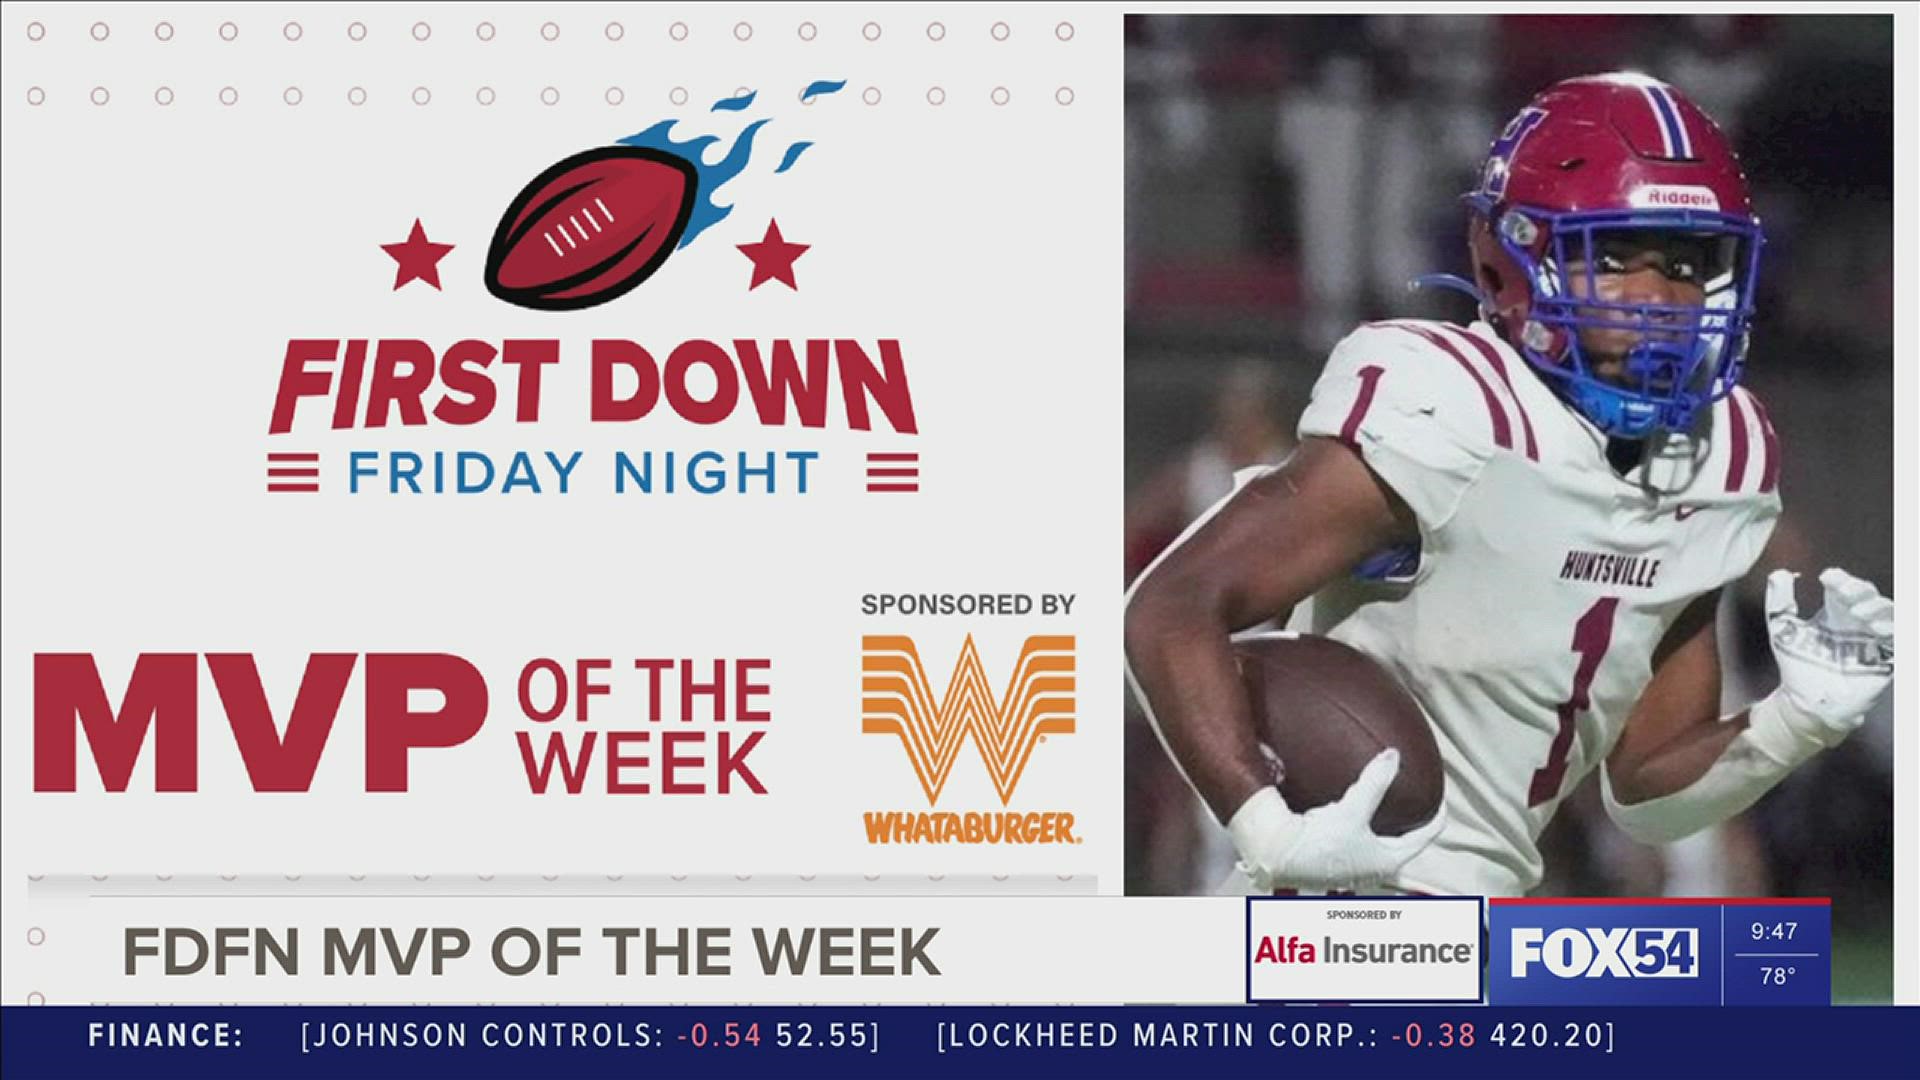 Huntsville running back Carlin Long rushed for 197 yards and scored 3 touchdowns last week against Bob Jones. For his efforts, he is the newest FDFN MVP of the Week.